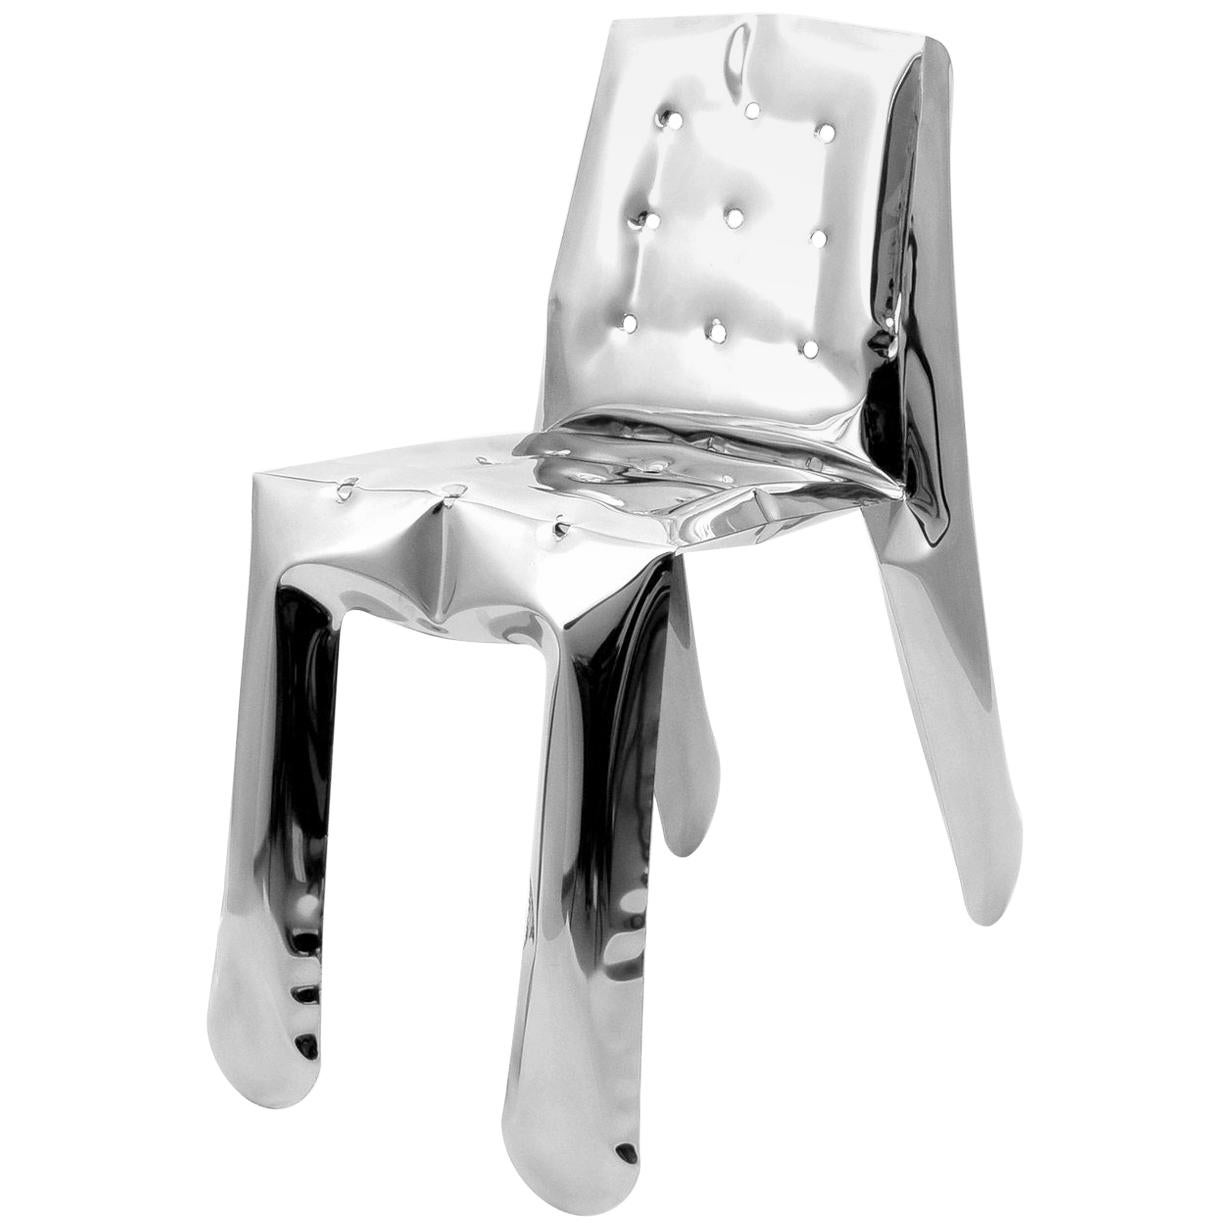 In Stock in Los Angeles, Limited Edition Chair in Polished Stainless Steel